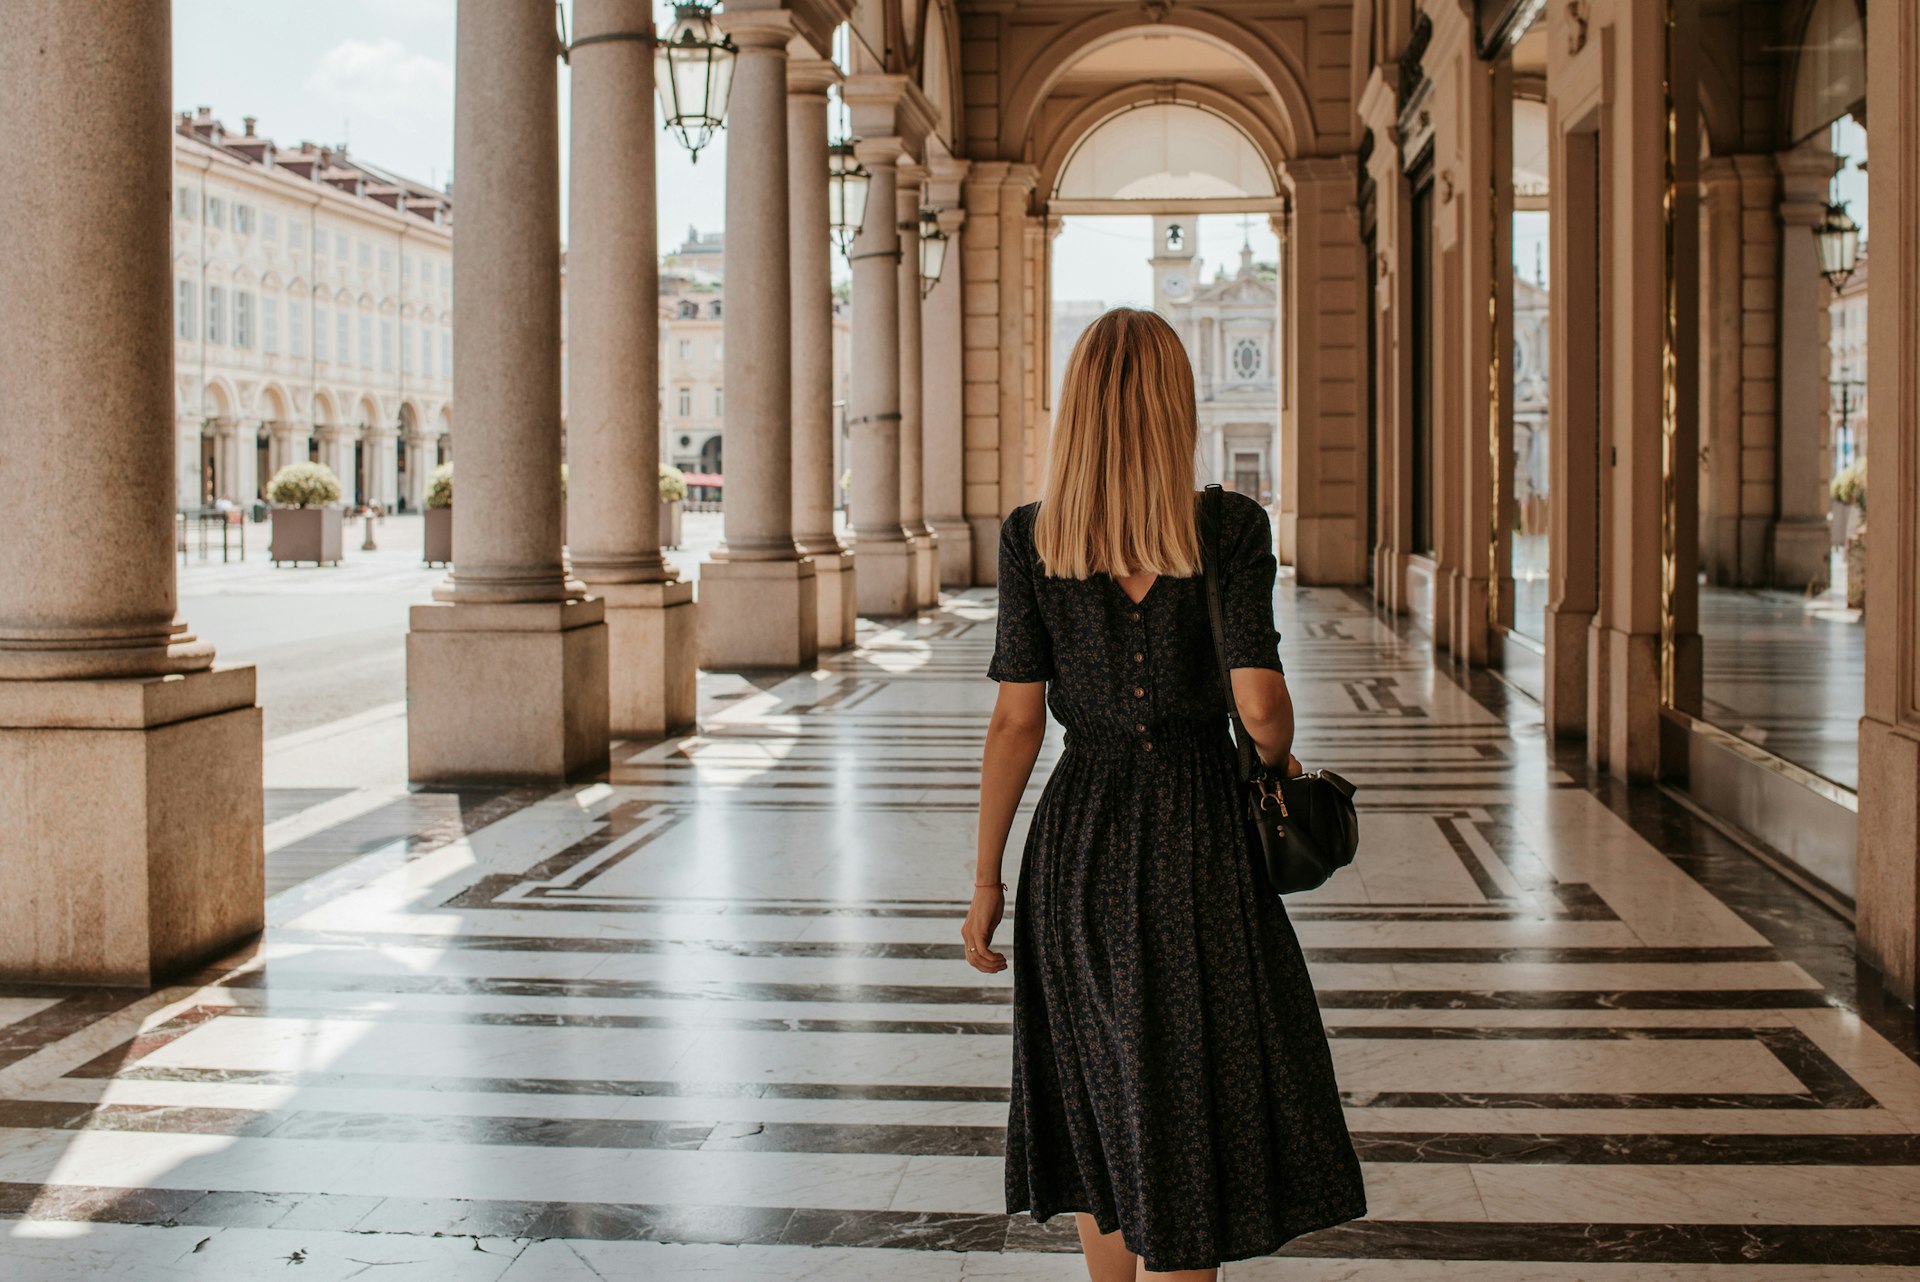 A woman walking along a sheltered portico in Turin, Italy